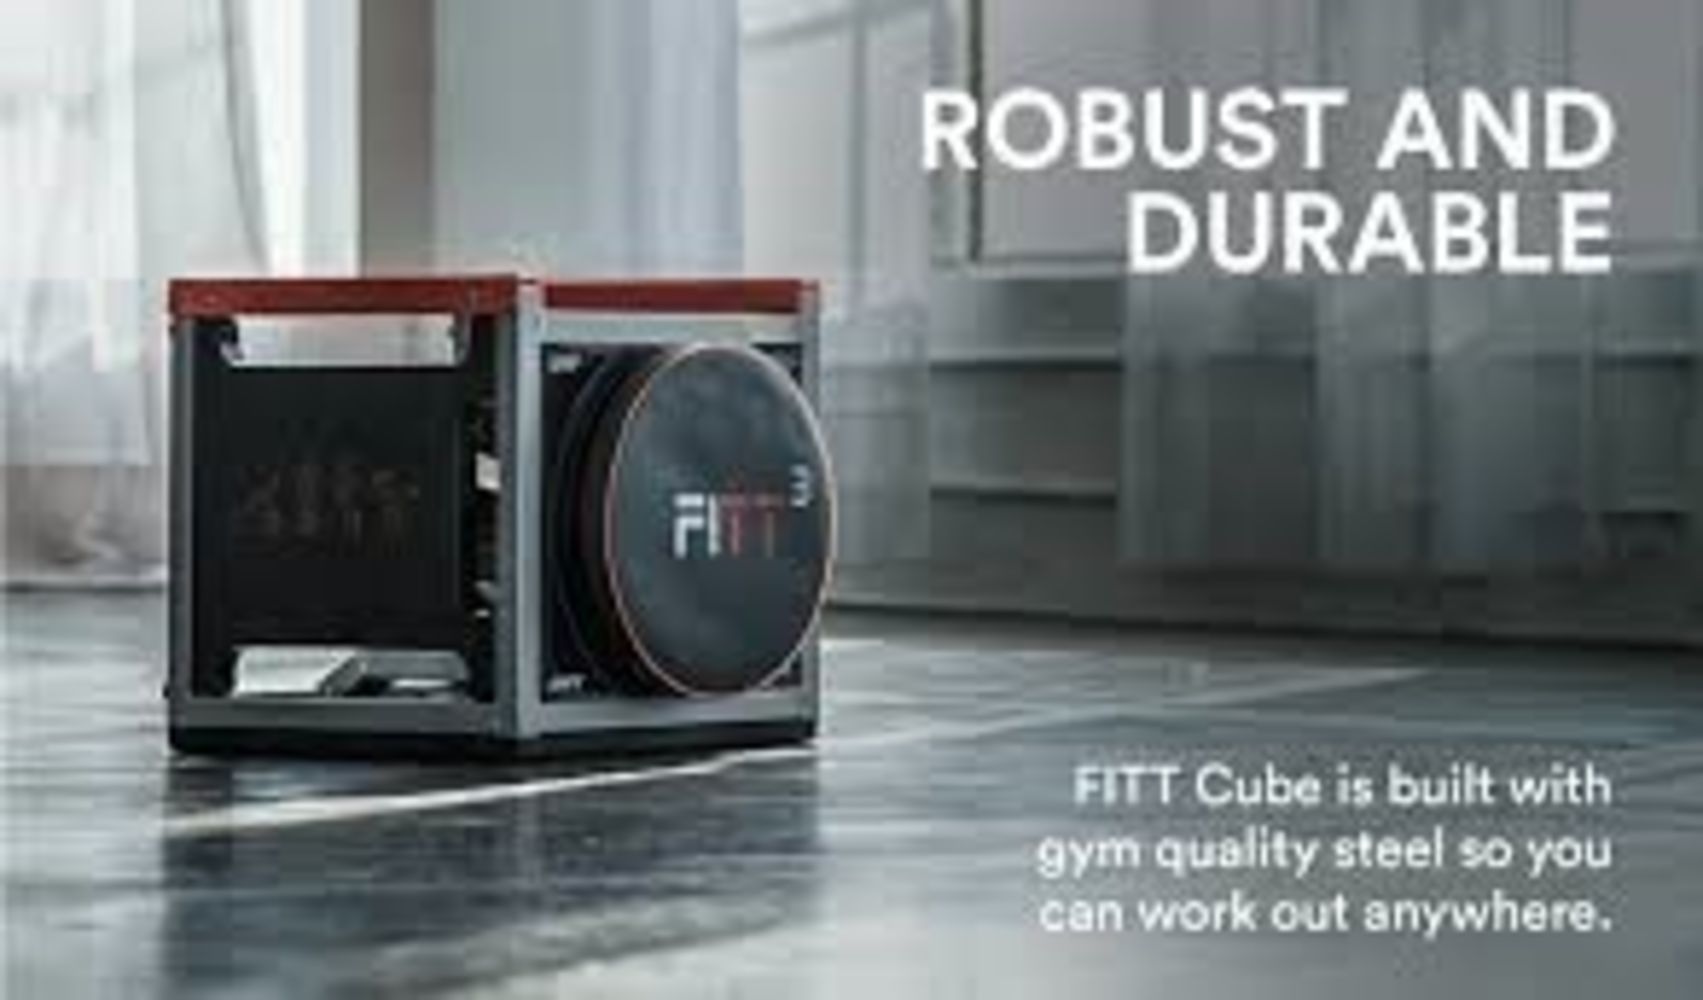 We are still open on Monday!!, Pallets of Fitt Cube complete home exercise machines.